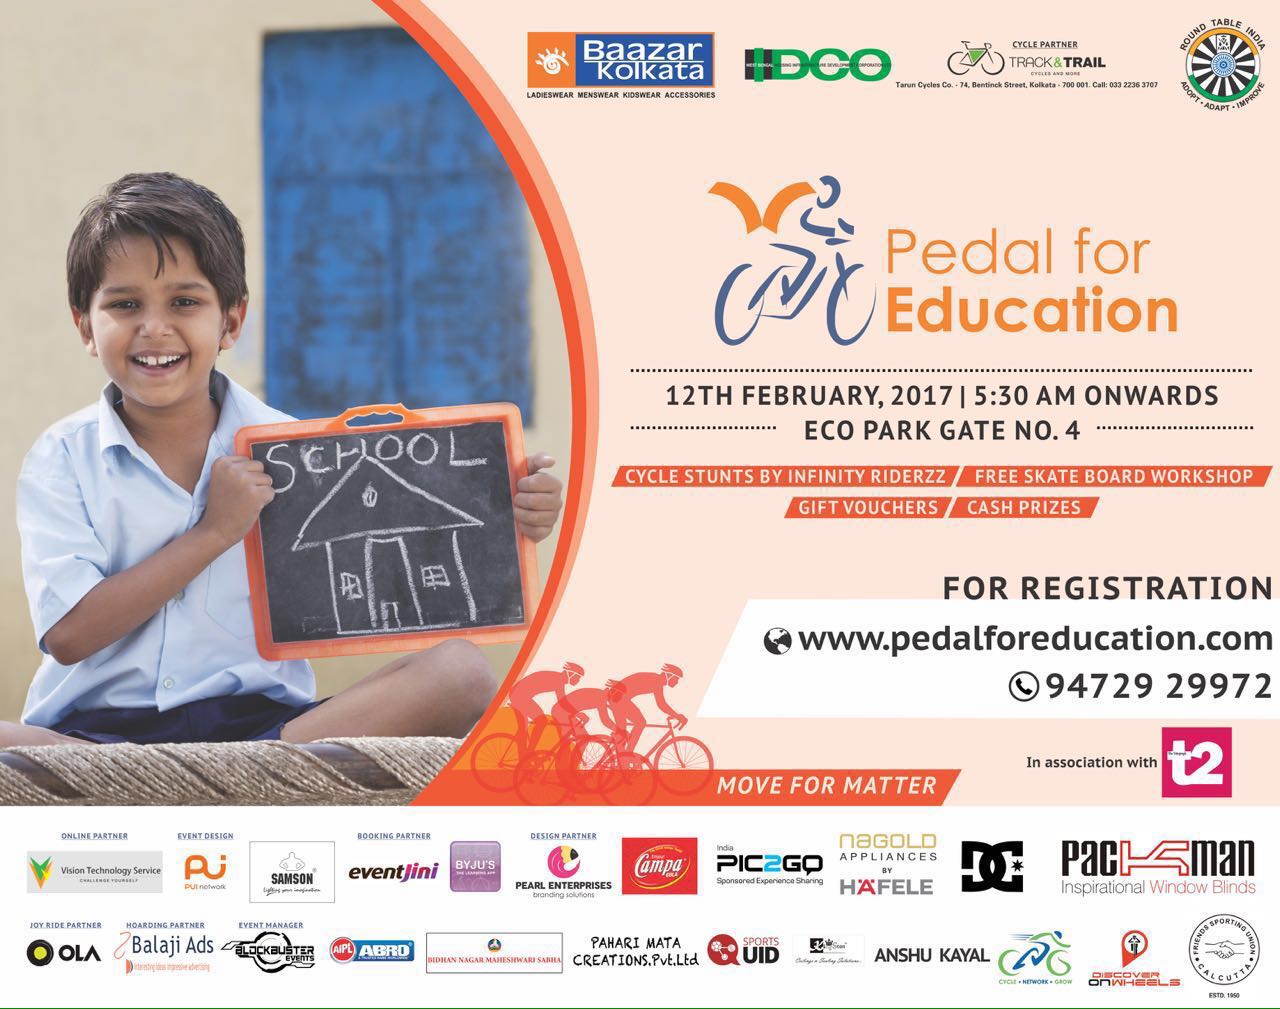 Supported Pedal For Education – a cycling event that raised funds for the underprivileged children